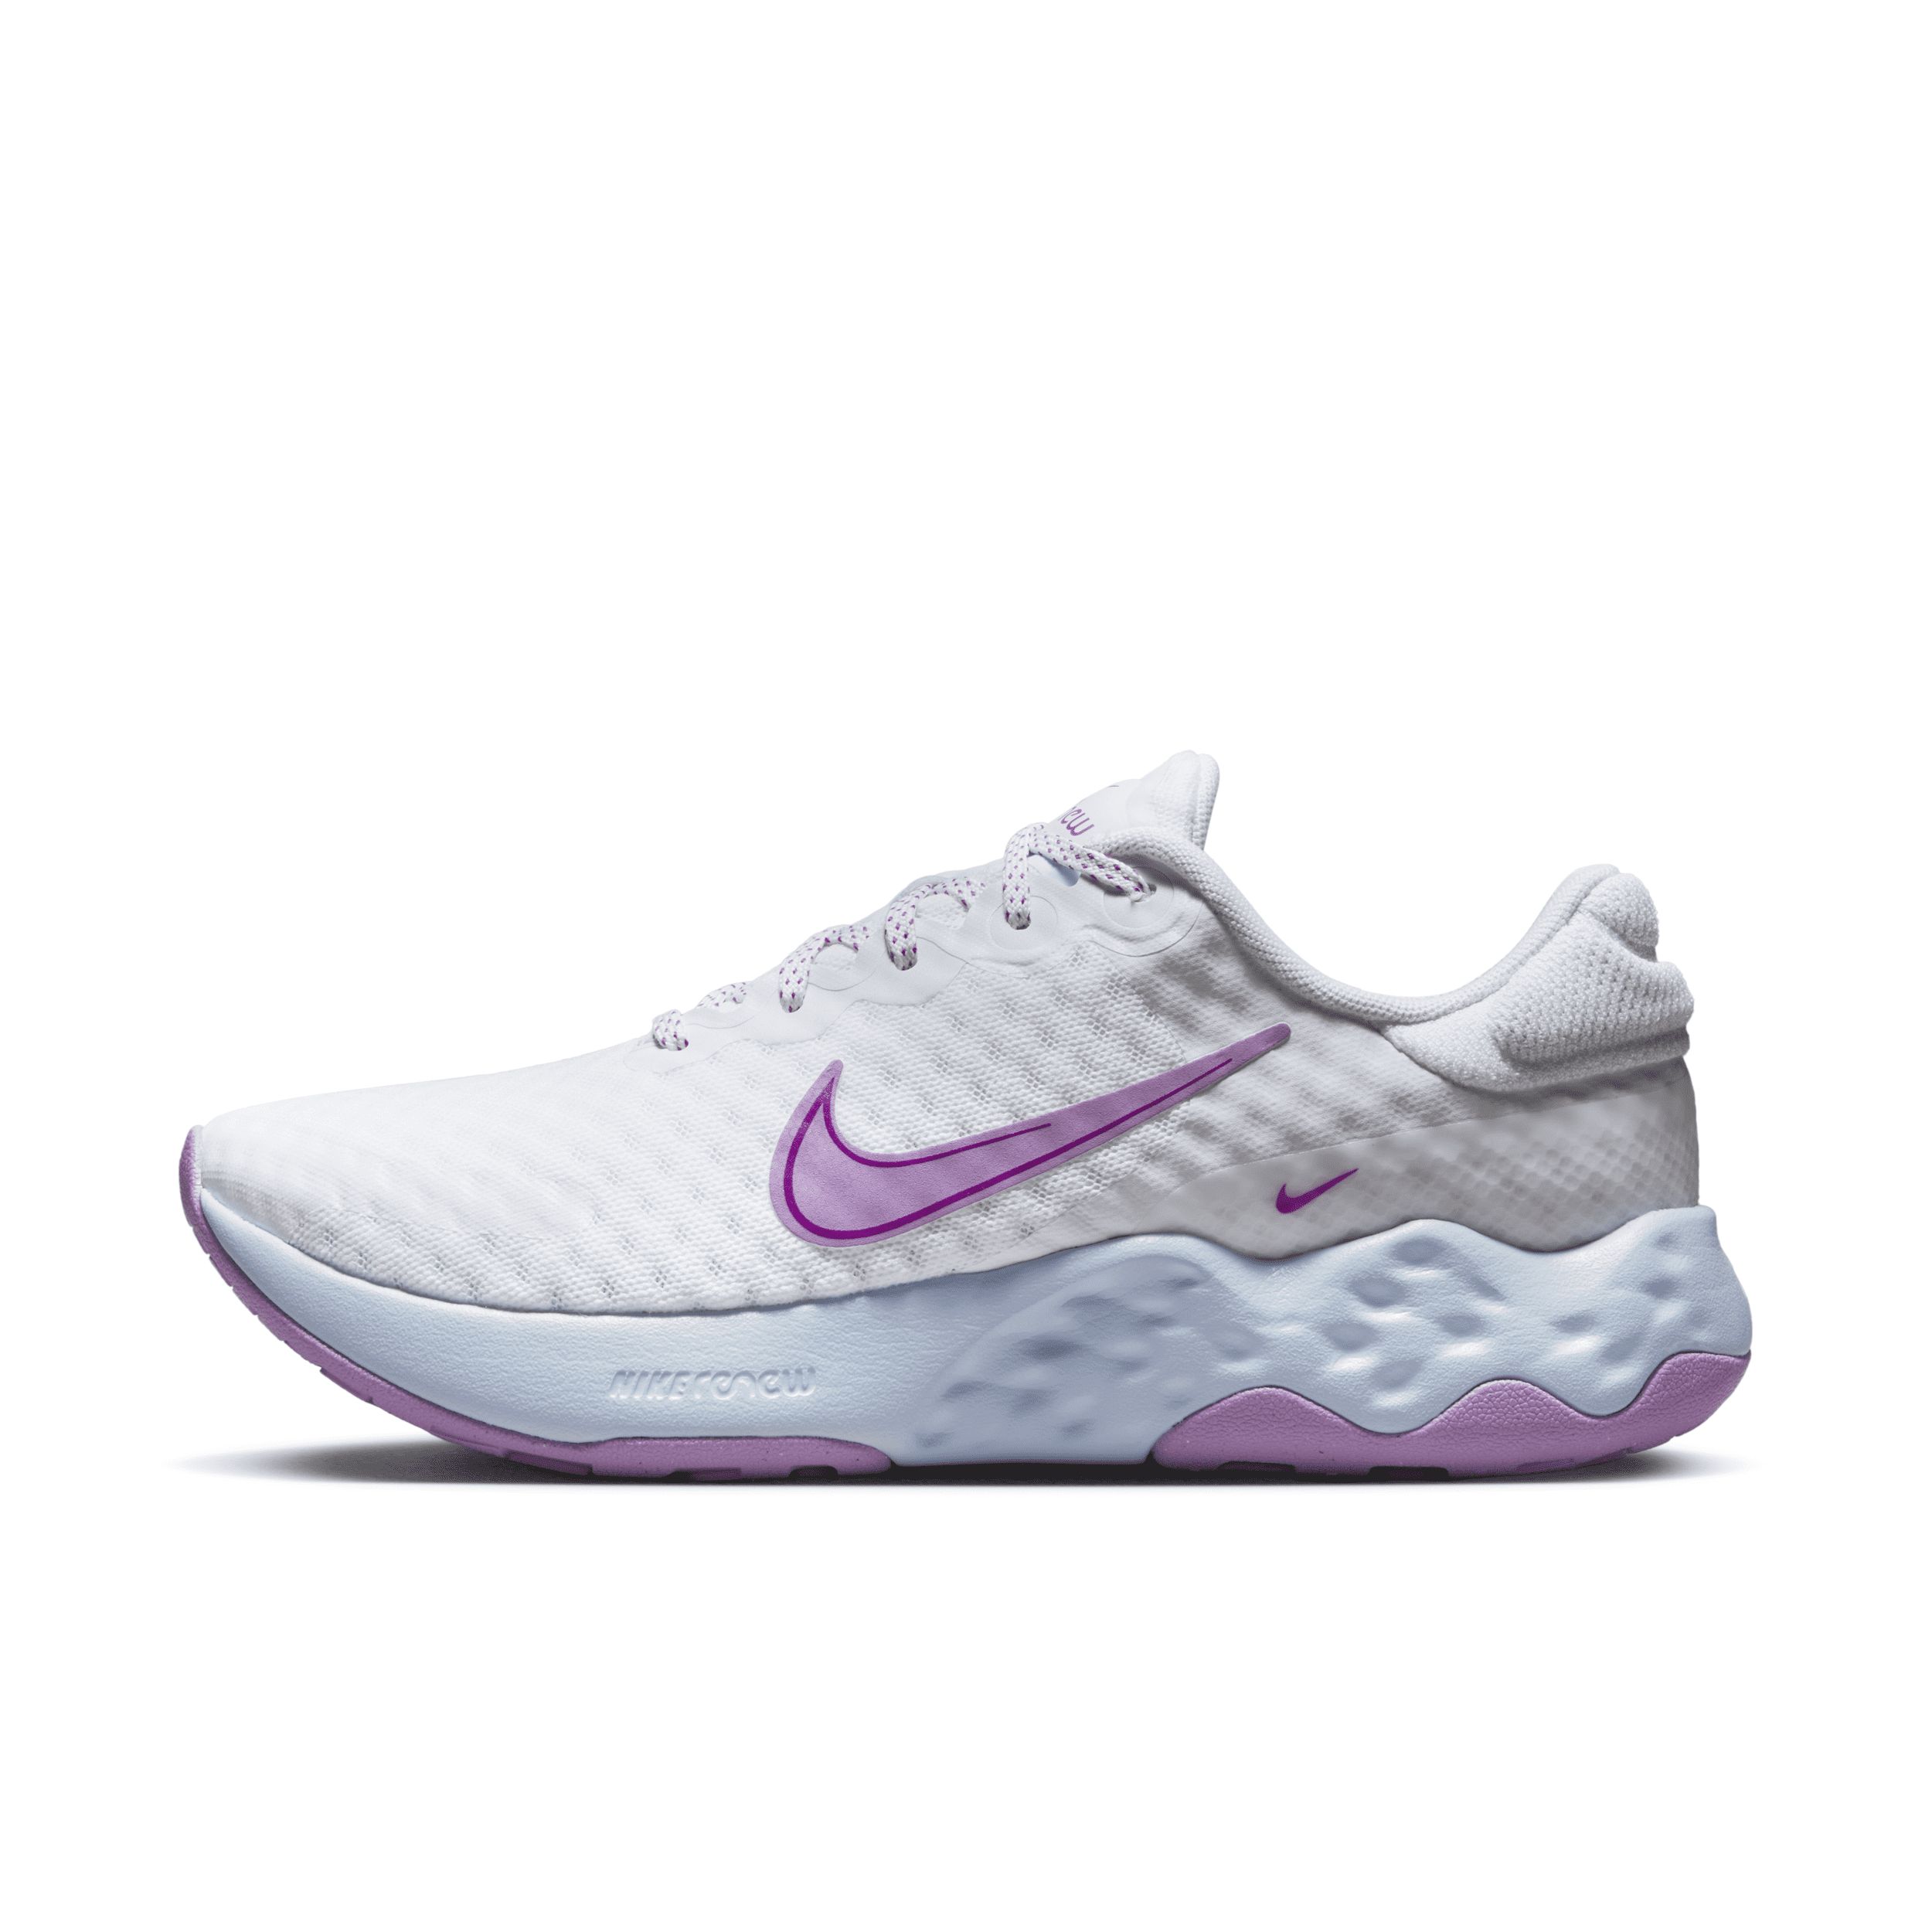 Nike Women's Renew Ride 3 Road Running Shoes in White, Size: 5.5 | DC8184-102 | Nike (US)